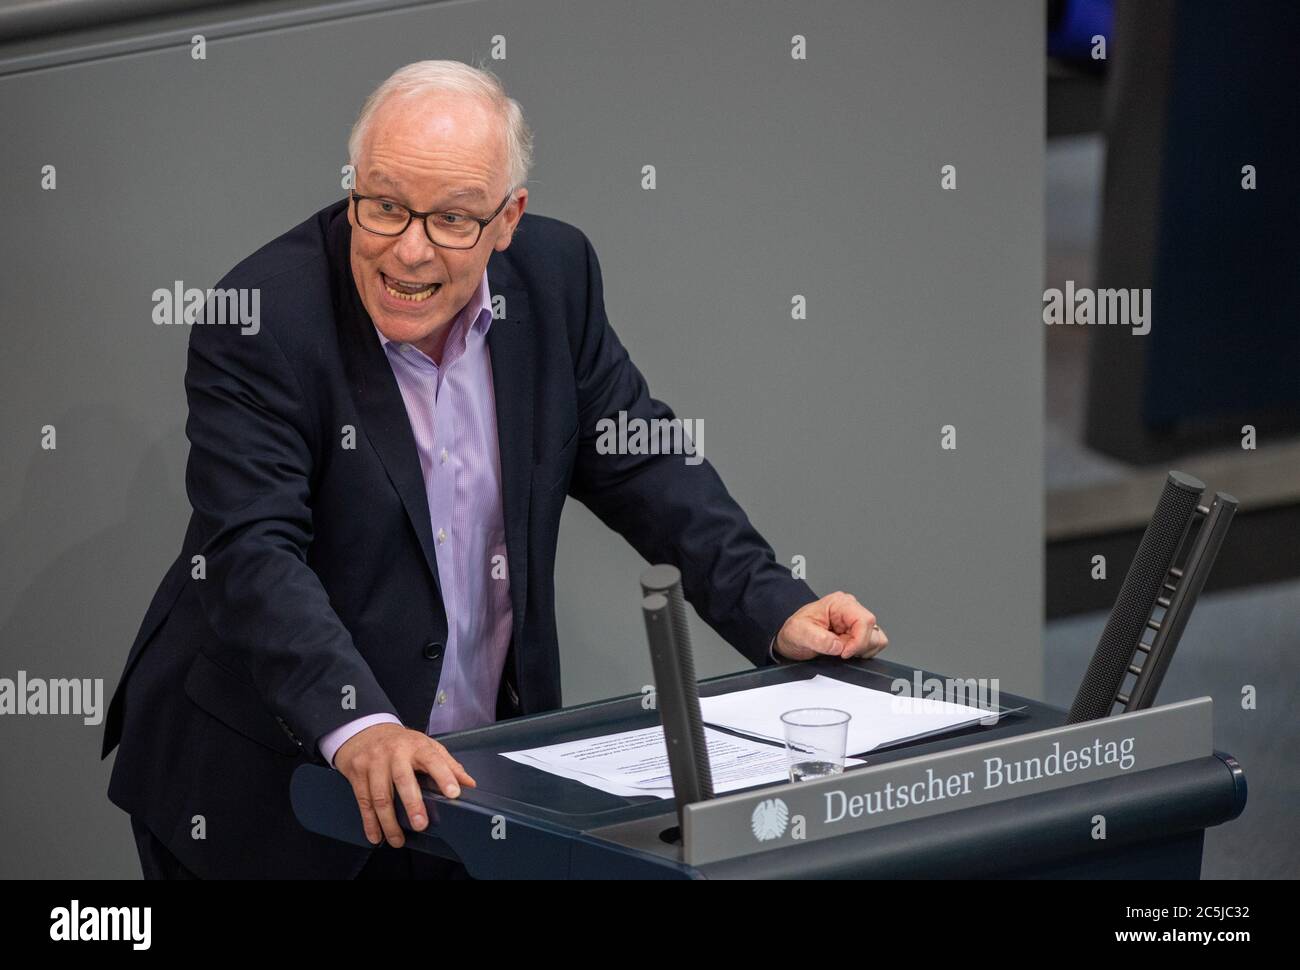 Berlin, Germany. 03rd July, 2020. Matthias Bartke (SPD) speaks in the plenary session of the German Bundestag. The main topics of the 171st session of the 19th legislative period are the adoption of the Coal Exit Act, a topical hour on the excesses of violence in Stuttgart, as well as debates on electoral law reform, the protection of electronic patient data, the welfare of farm animals and the German chairmanship of the UN Security Council. Credit: Christophe Gateau/dpa/Alamy Live News Stock Photo